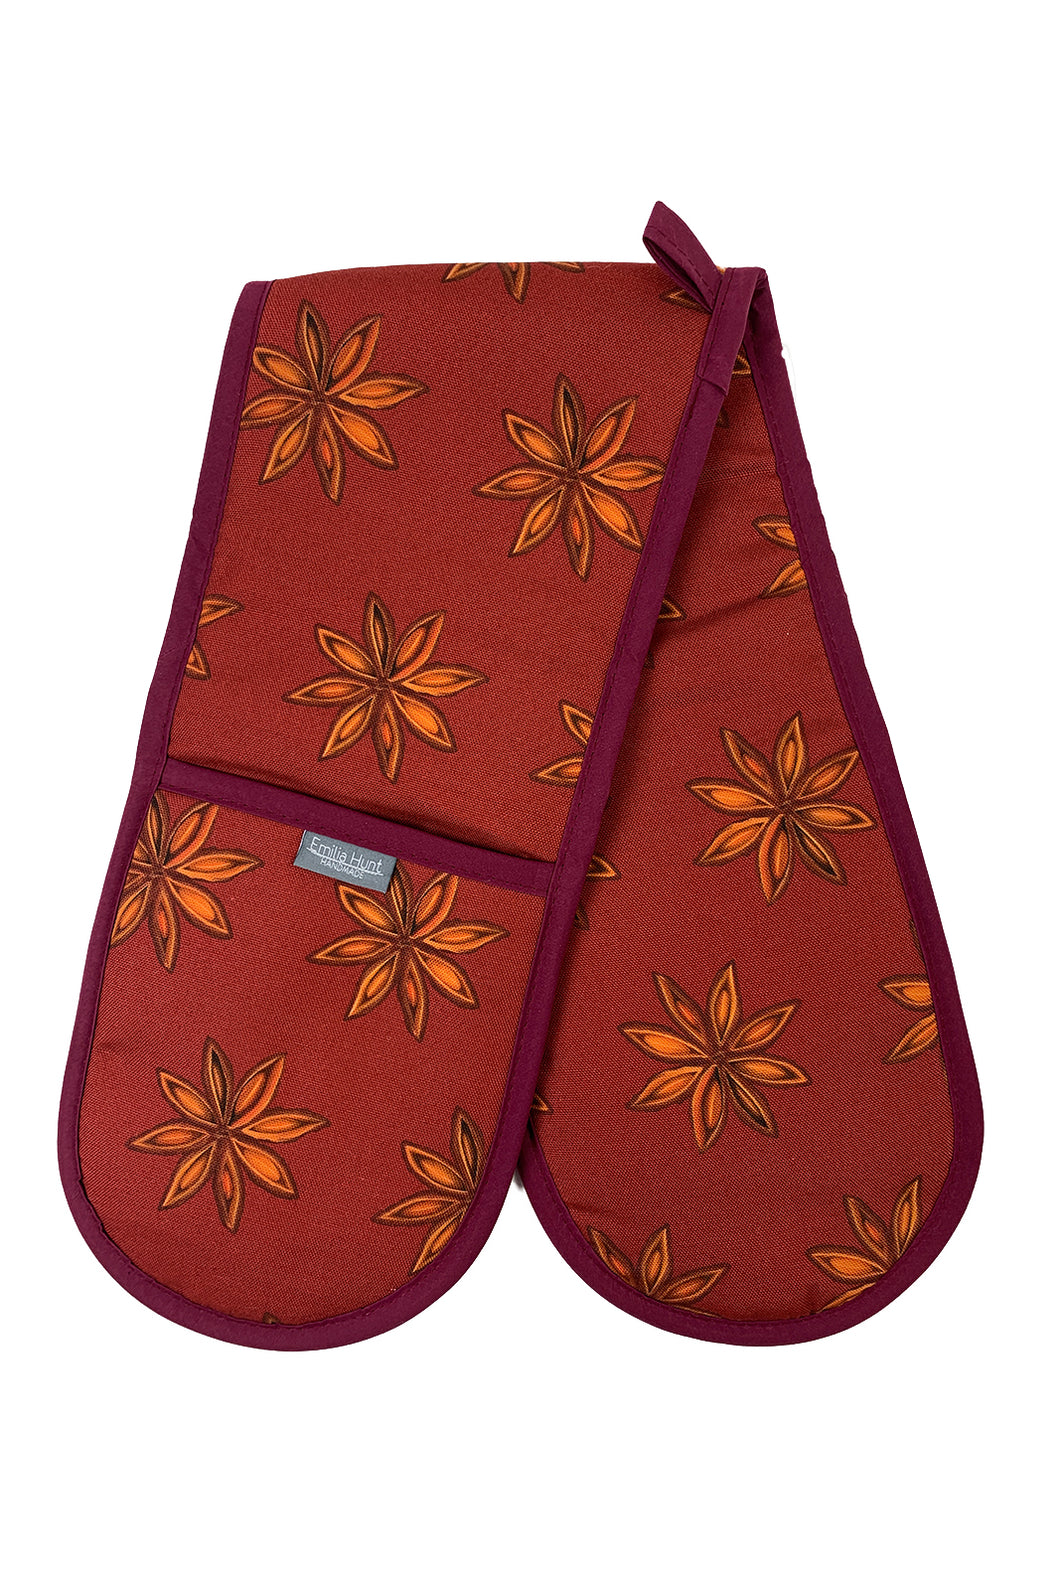 Star anise double oven glove